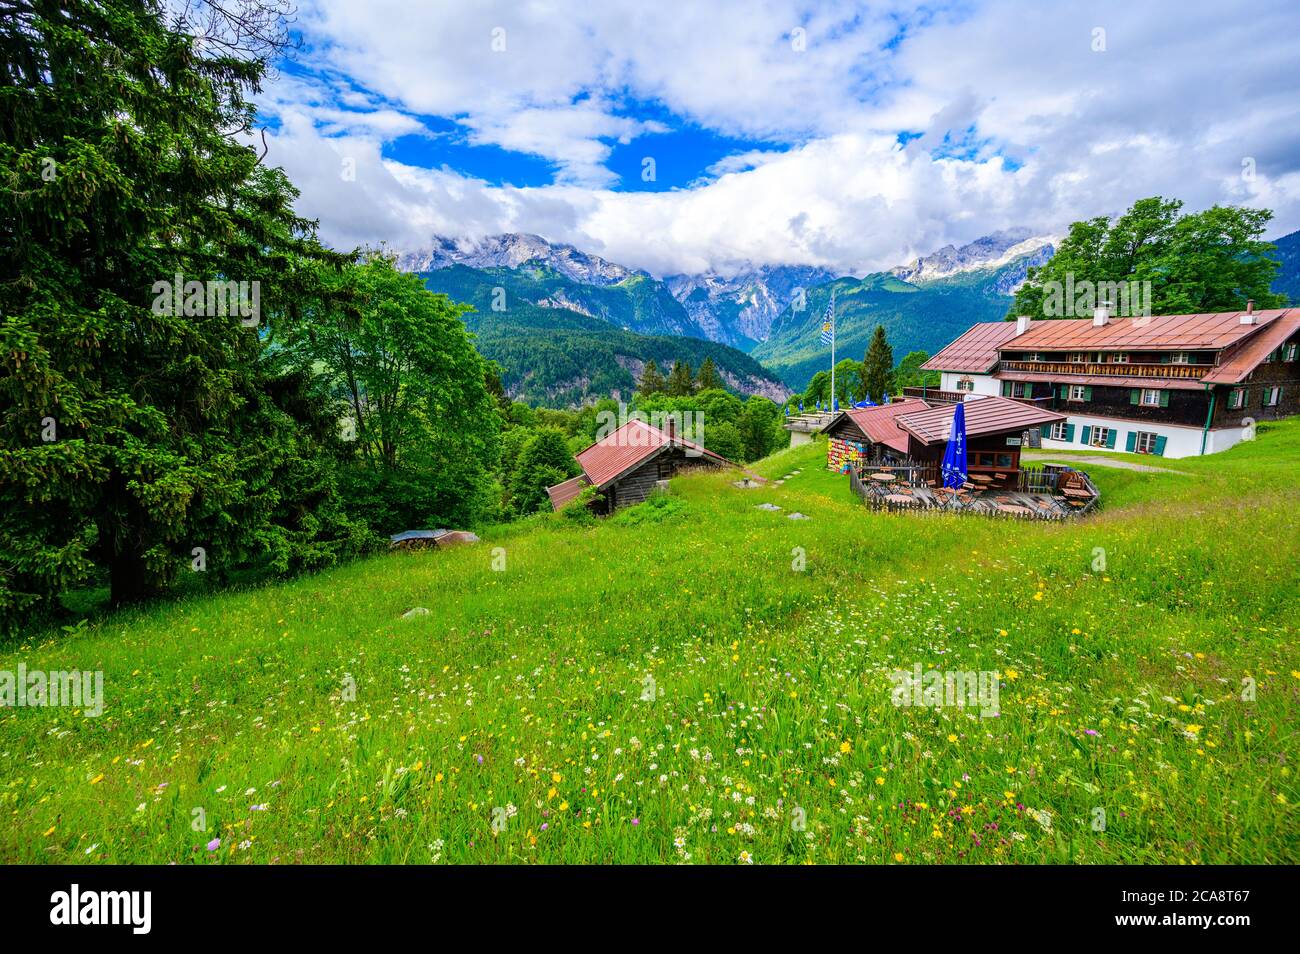 View from the top of Mountain Eckbauer to alps in the region of Garmisch-Partenkirchen, close to Zugspitze - Beautiful landscape scenery in Bavaria, G Stock Photo